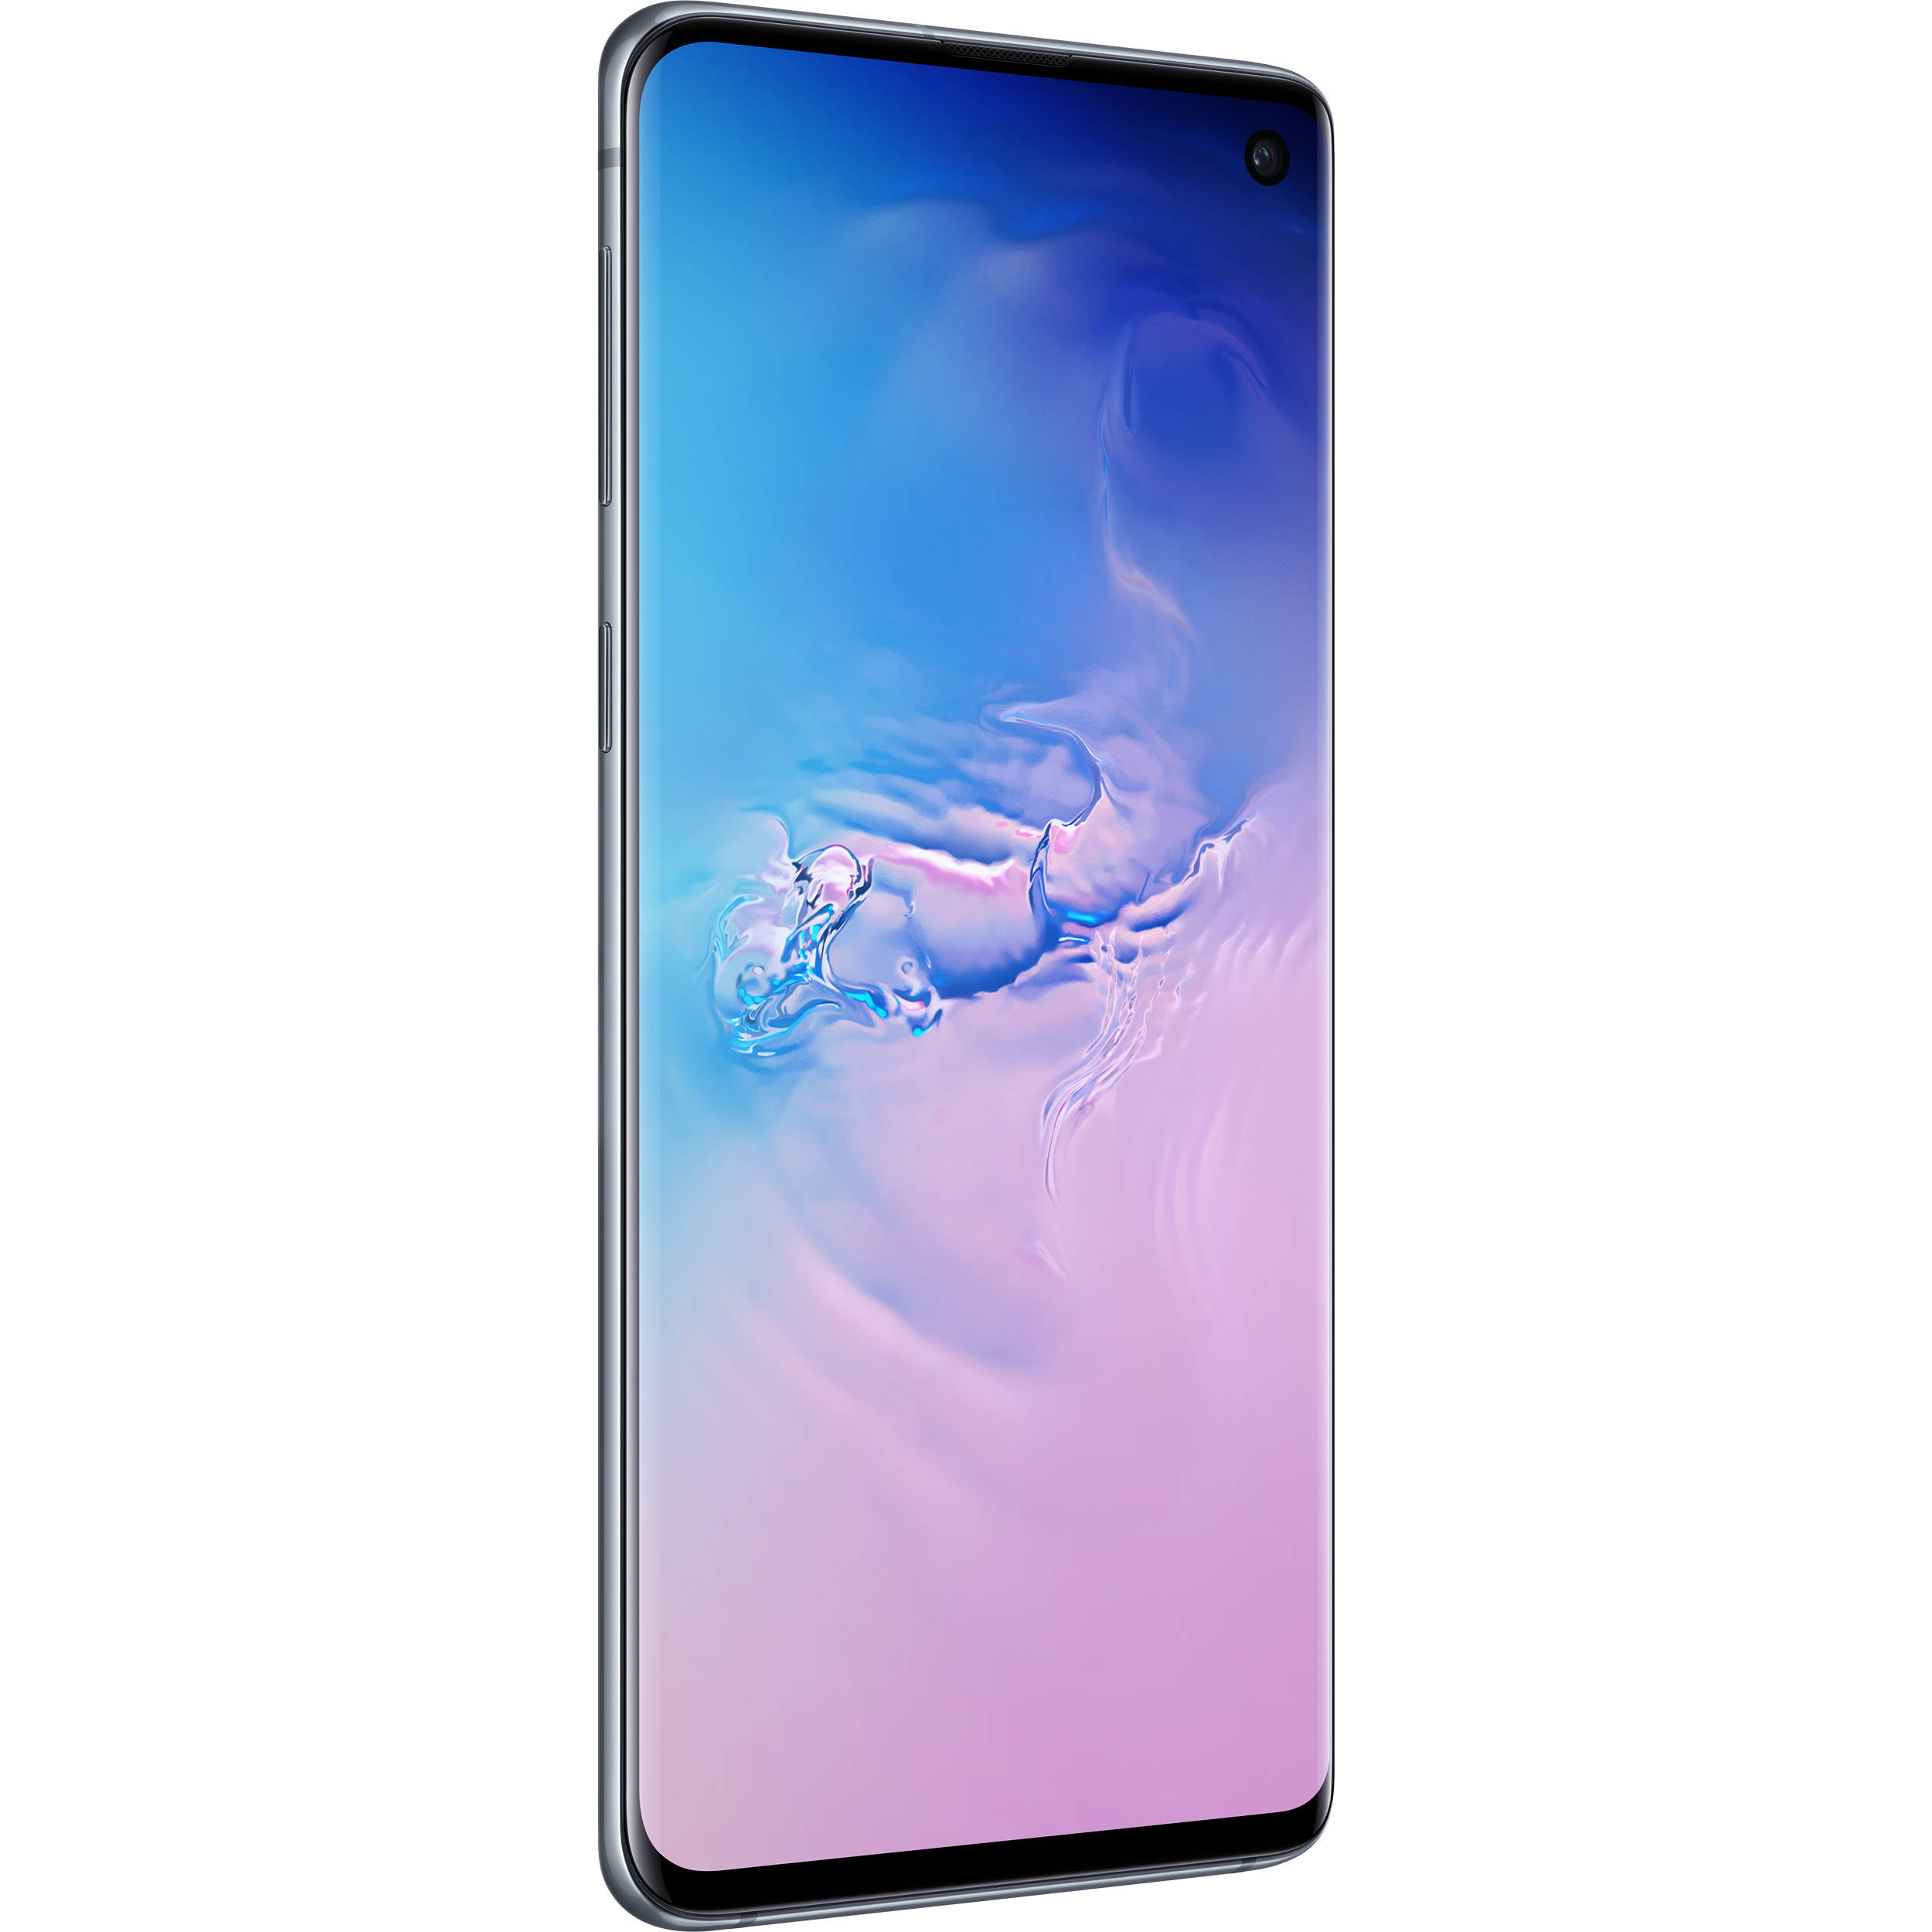 Pre-Owned Samsung Galaxy S10 G973U 128GB GSM/CDMA Unlocked Android Phone - Prism Blue (Refurbished: Good) - image 2 of 3